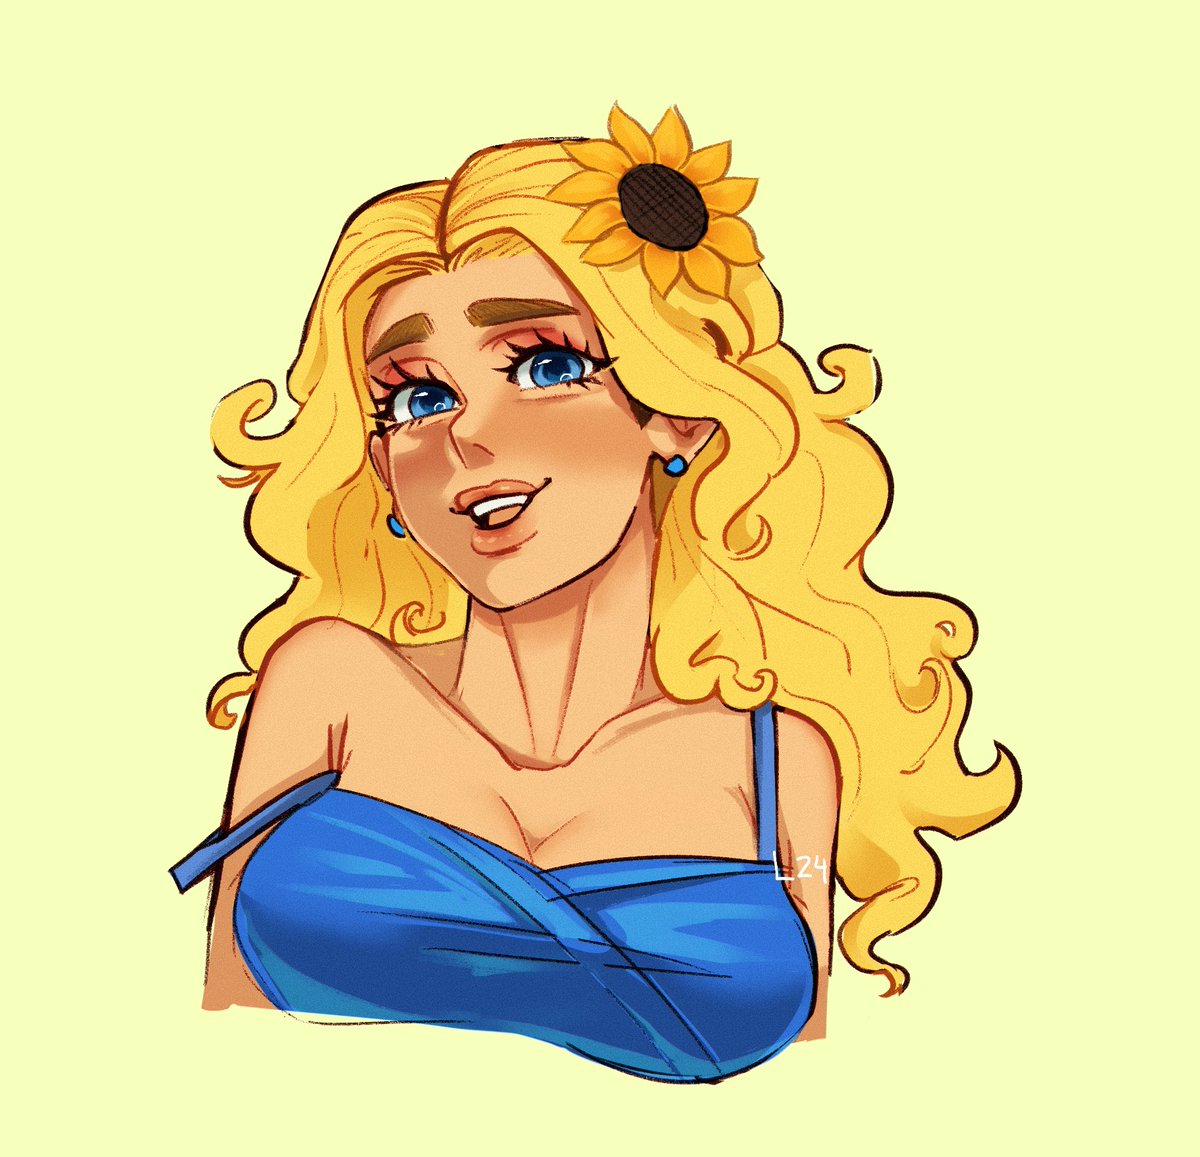 Haley from stardew valley doodle 🌻